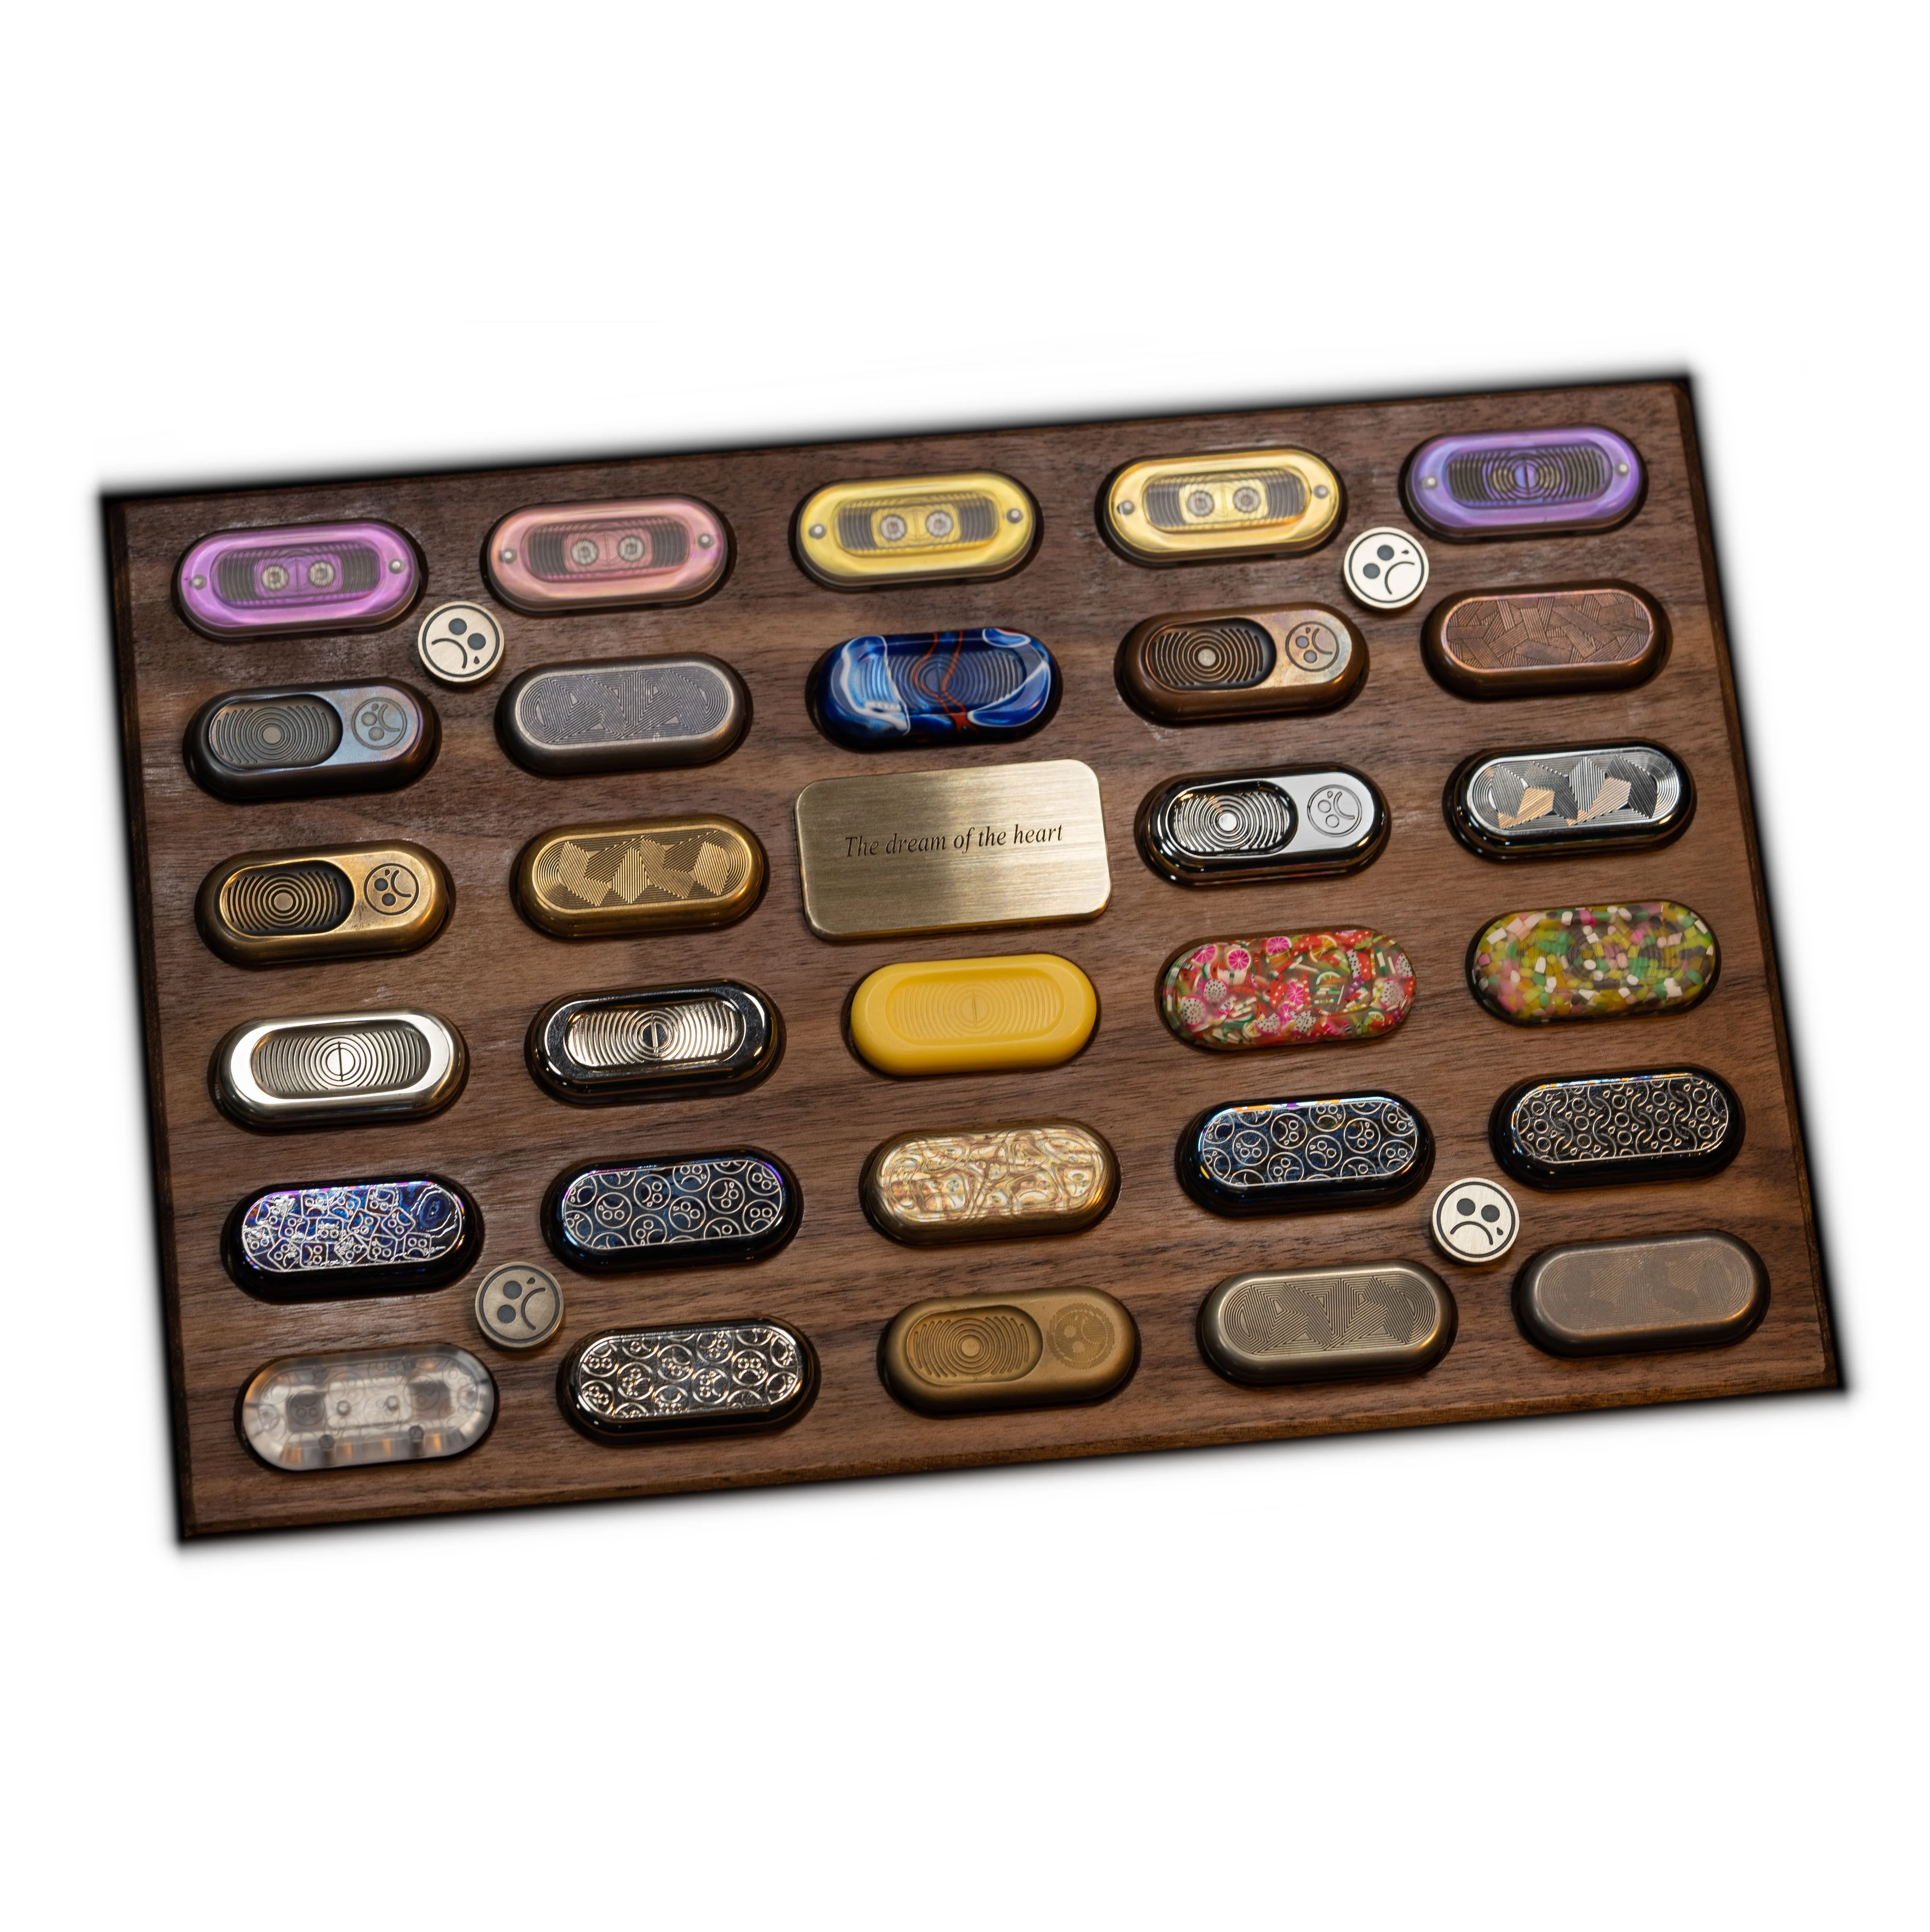 Dz. Top Coin Walnut Storage Box 29 Pieces Capacity Wooden Brass Alloy EDC Hand-drawn Toy Metal enlarge